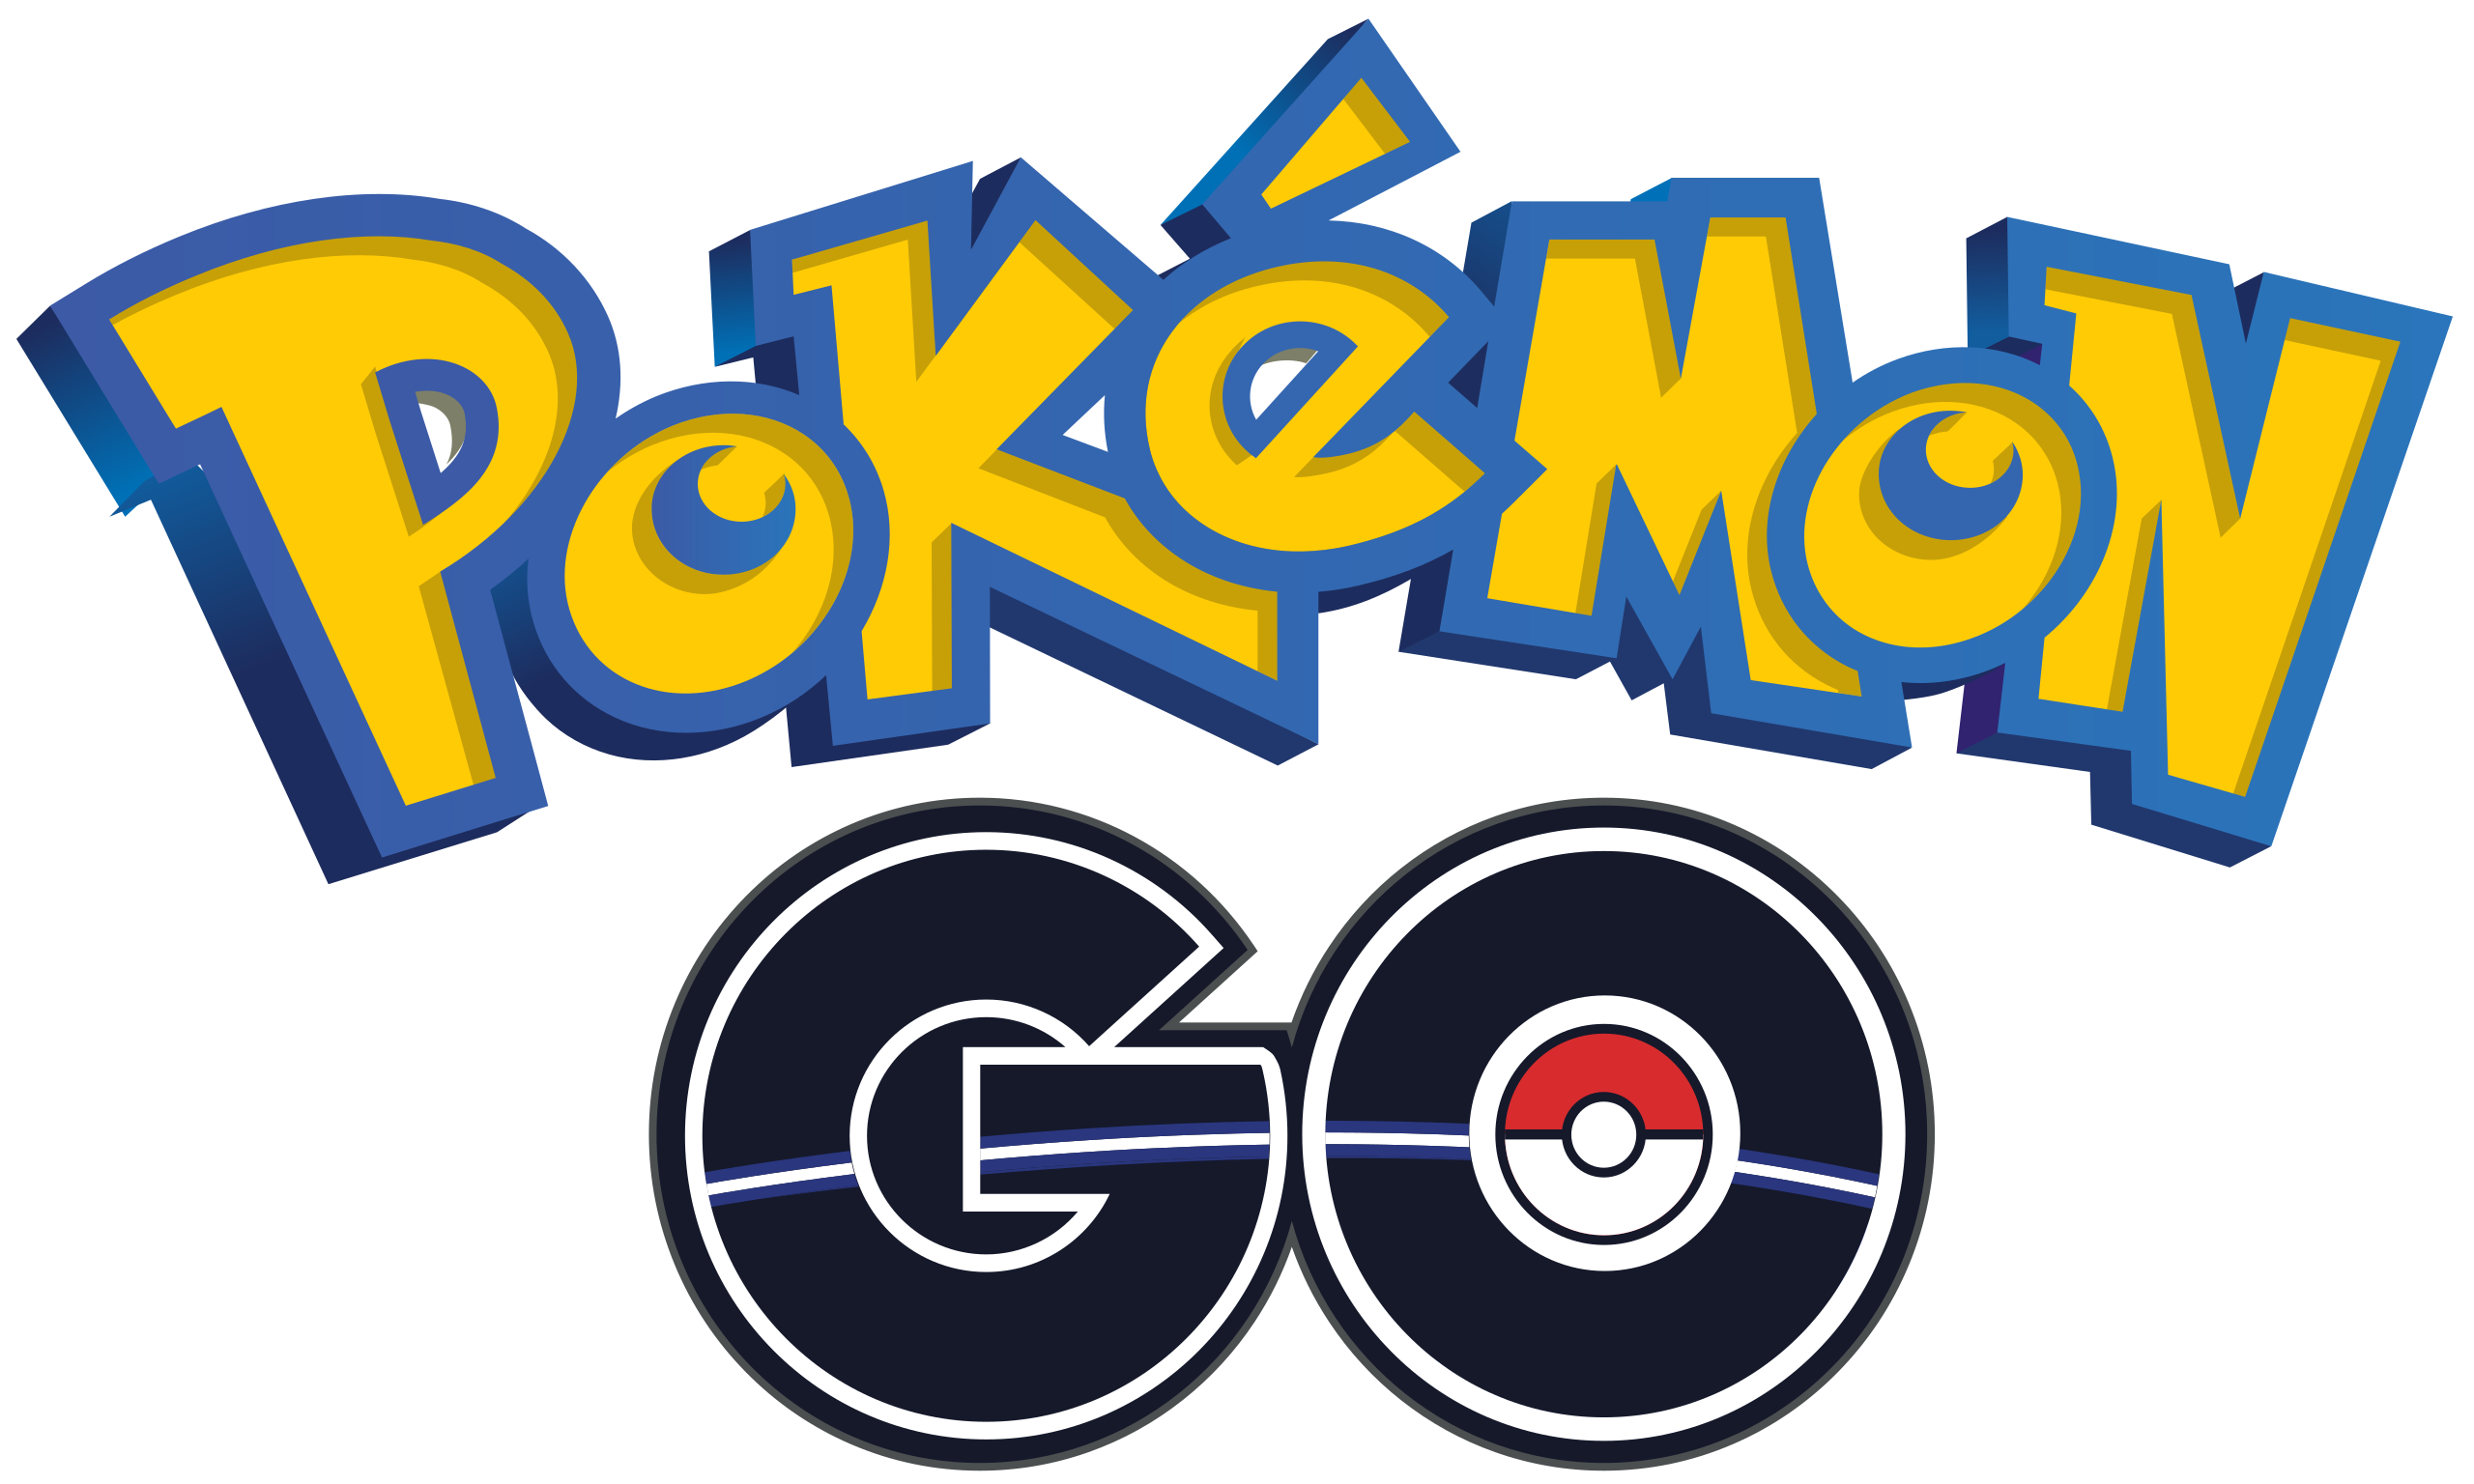 Pokemon Go Logo, Pokemon is written in yellow and blue lettering, and Go has a backdrop of outer space within the letters and a pokeball in the O of Go